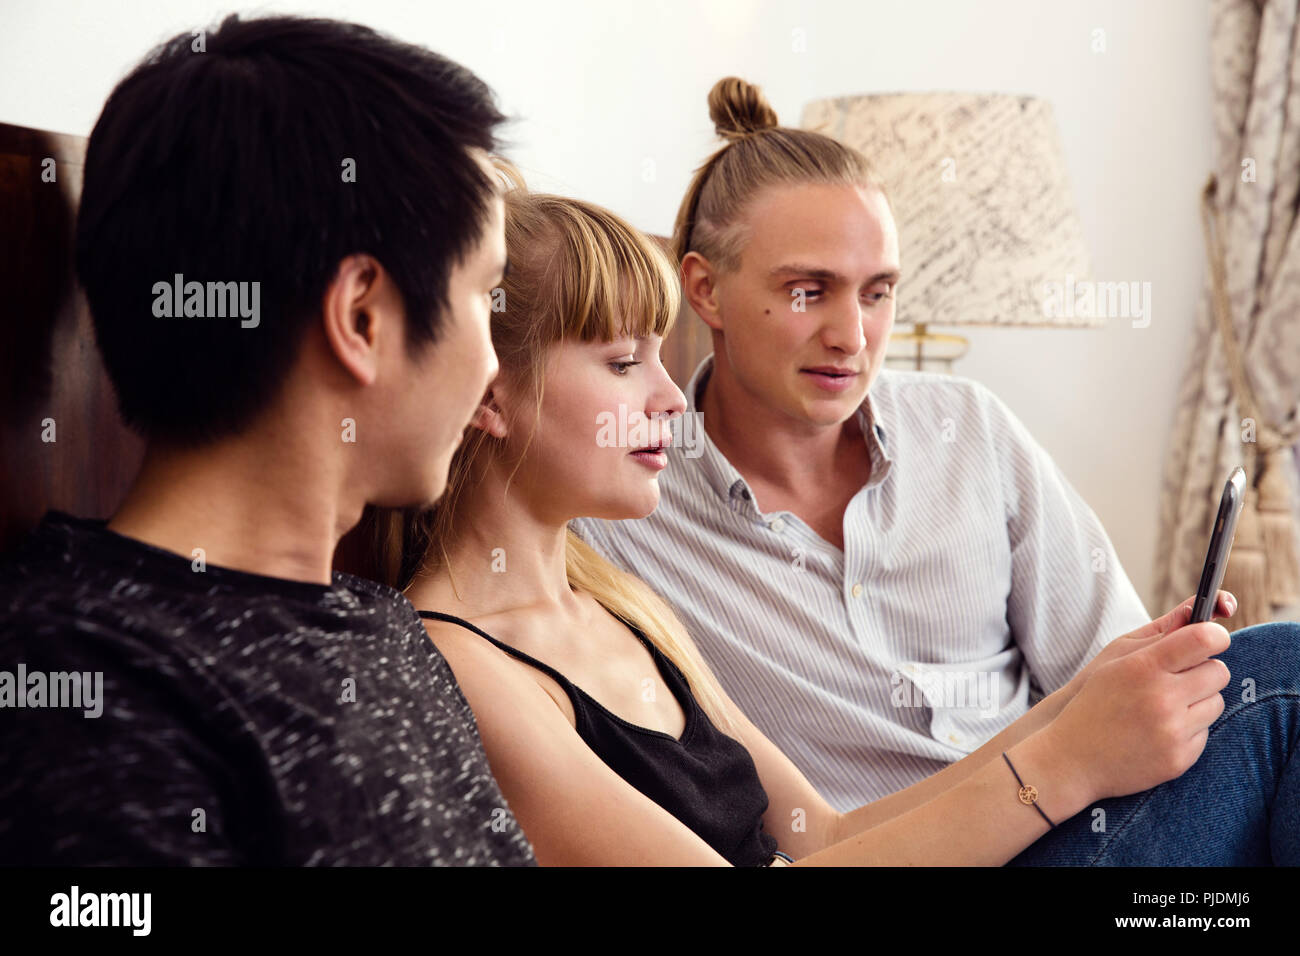 Jeune femme et homme amis looking at smartphone on bed Banque D'Images